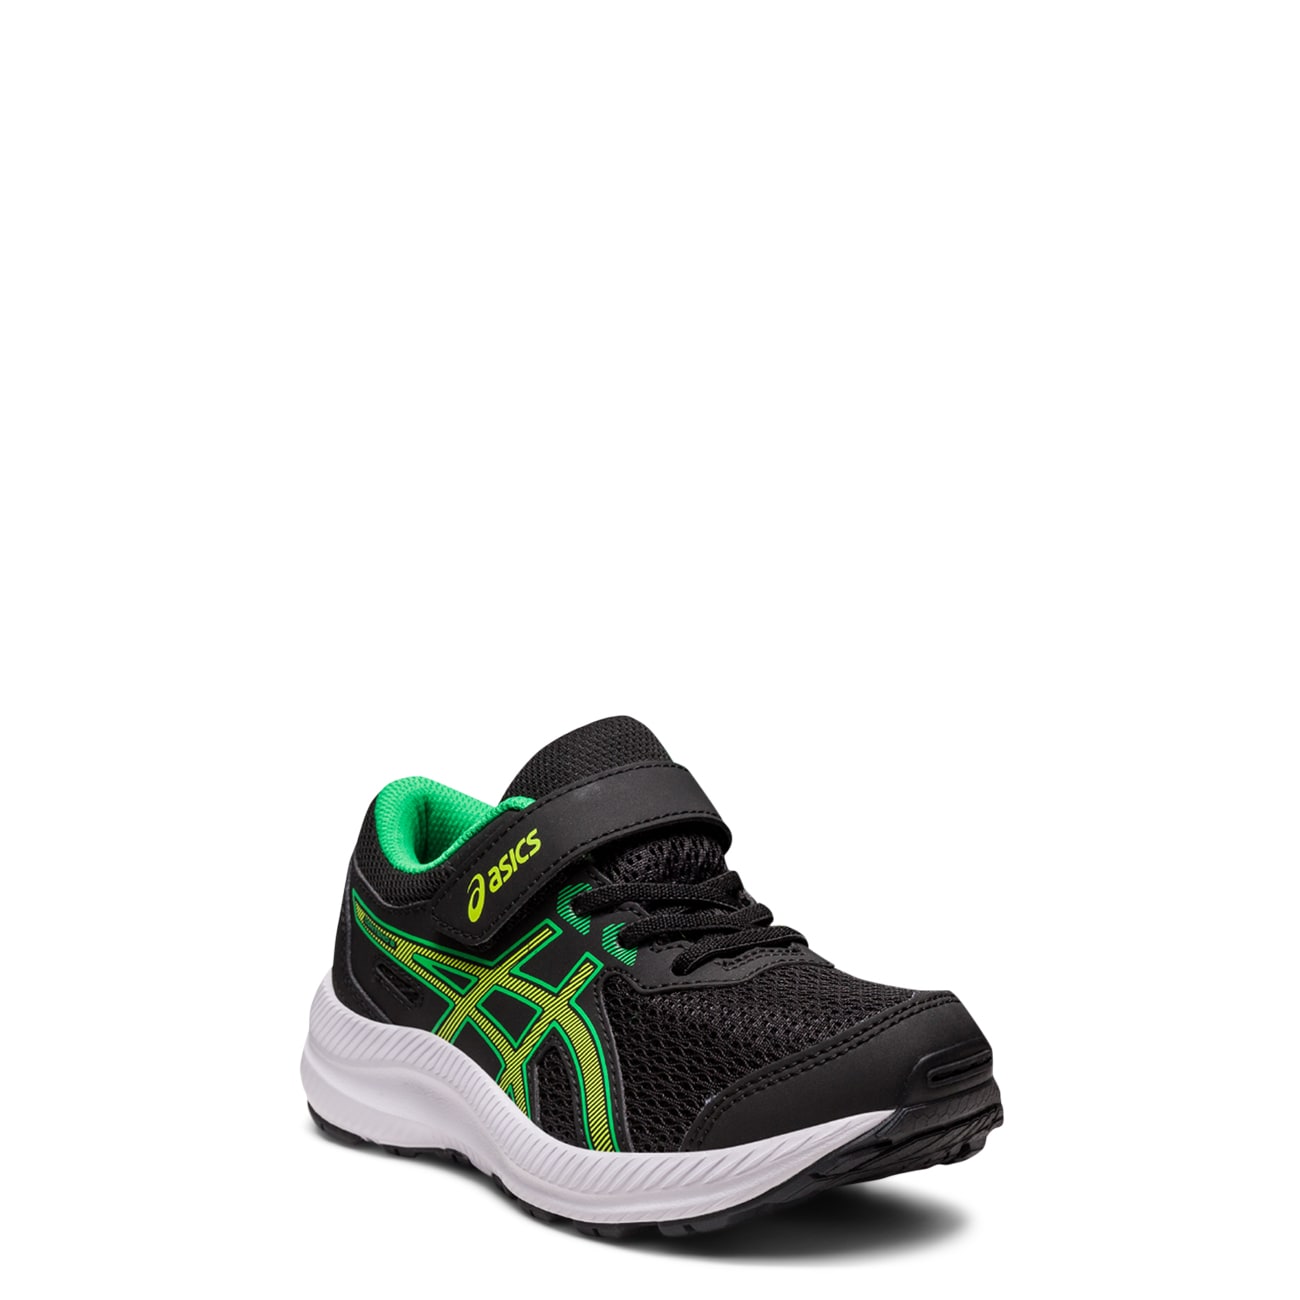 Youth Boys' Contend 8 TS Running Shoe